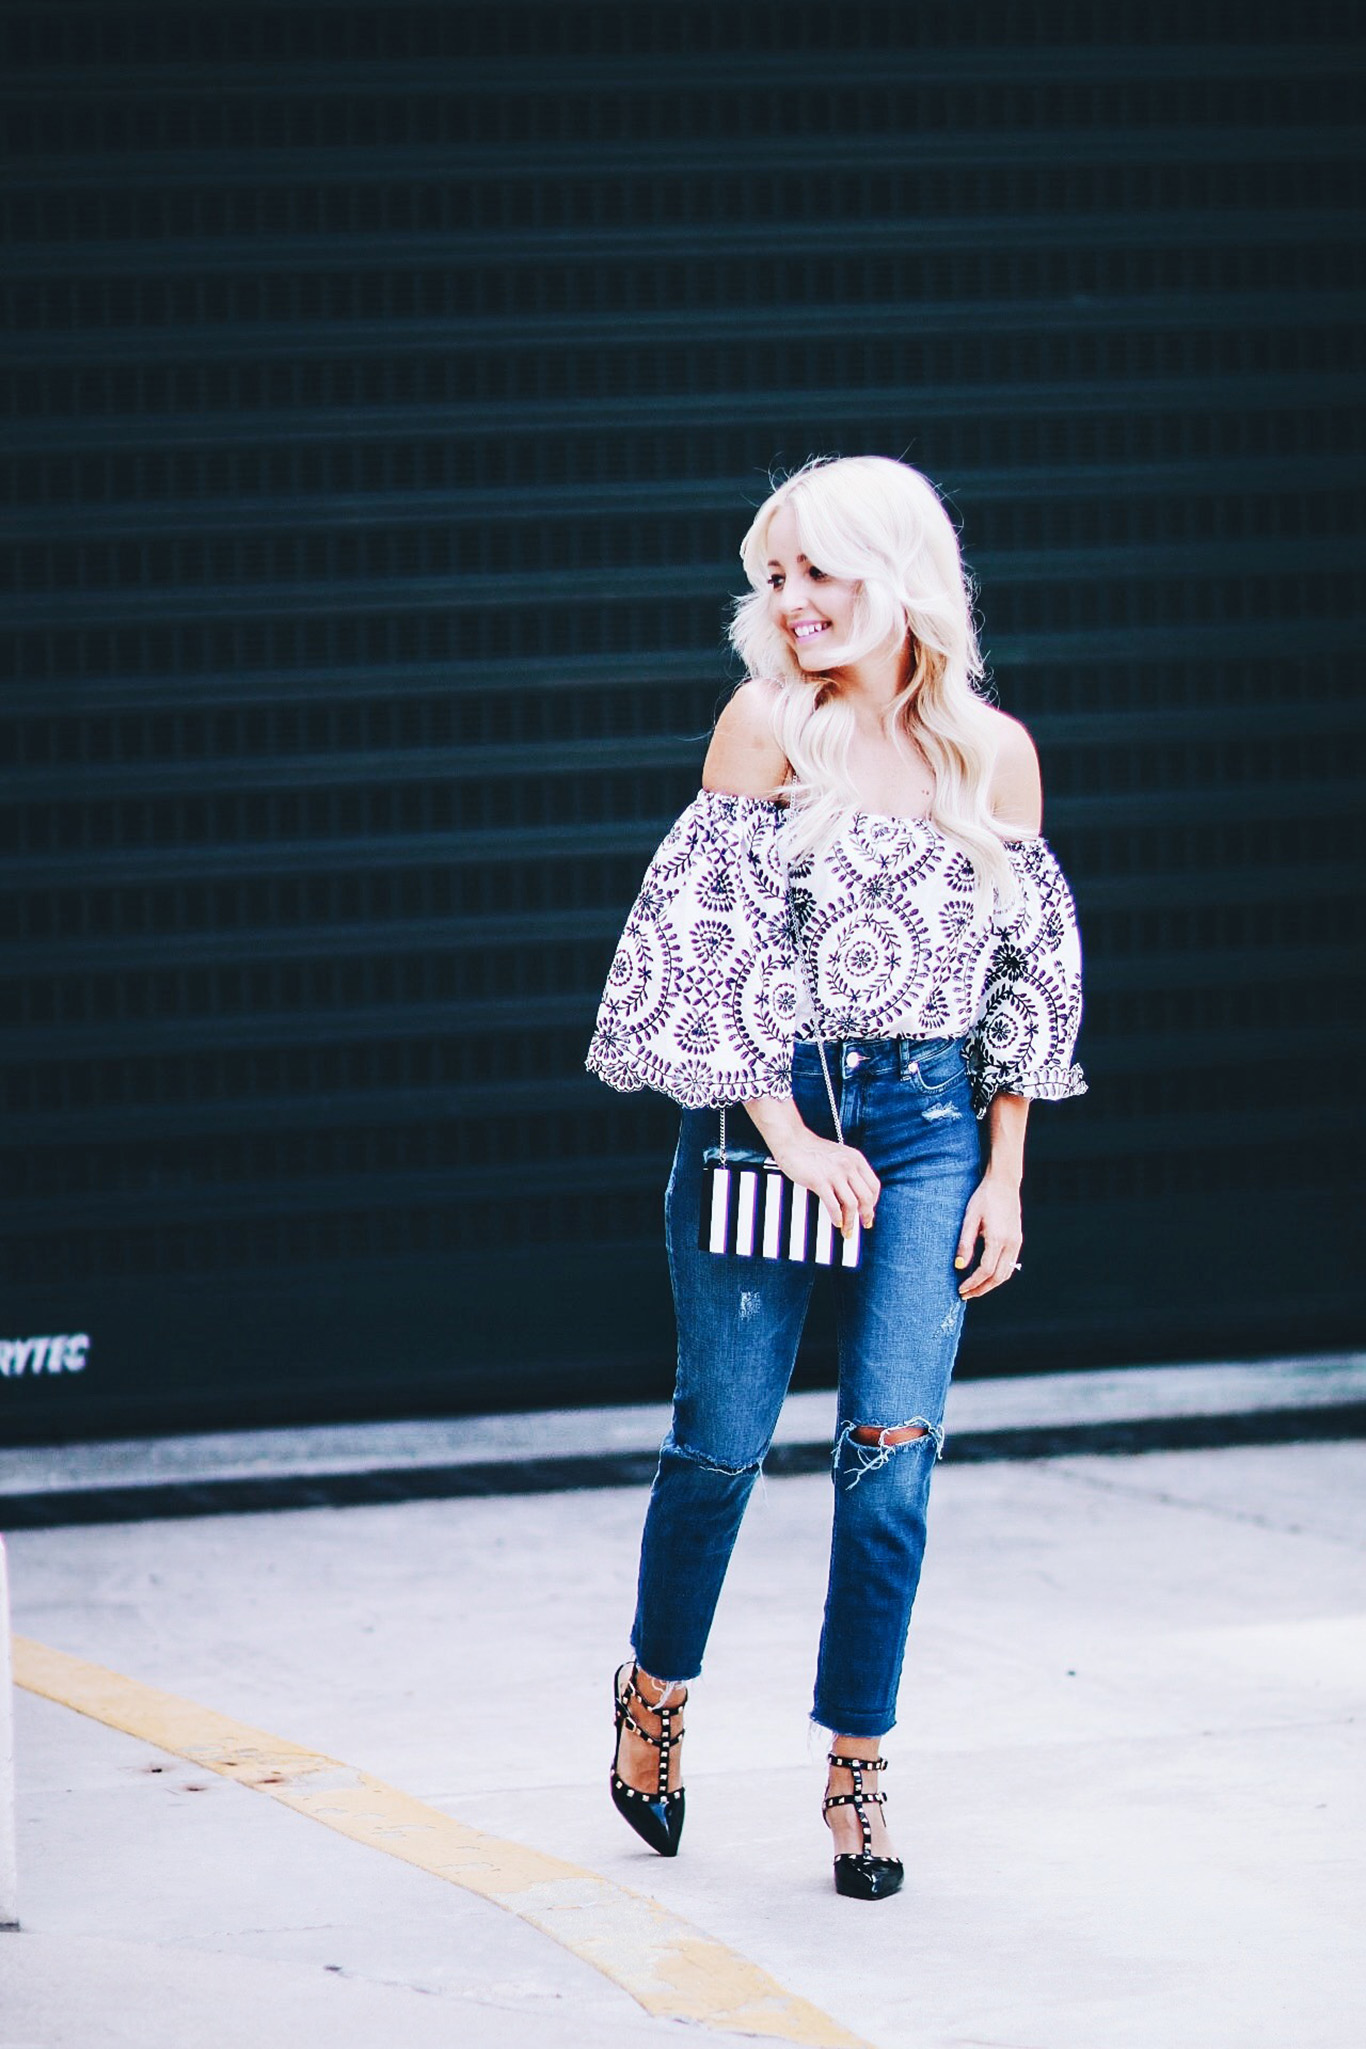 Alena Gidenko of modaprints.com styles an off the shoulder printed top with boyfriend jeans and studded black heels